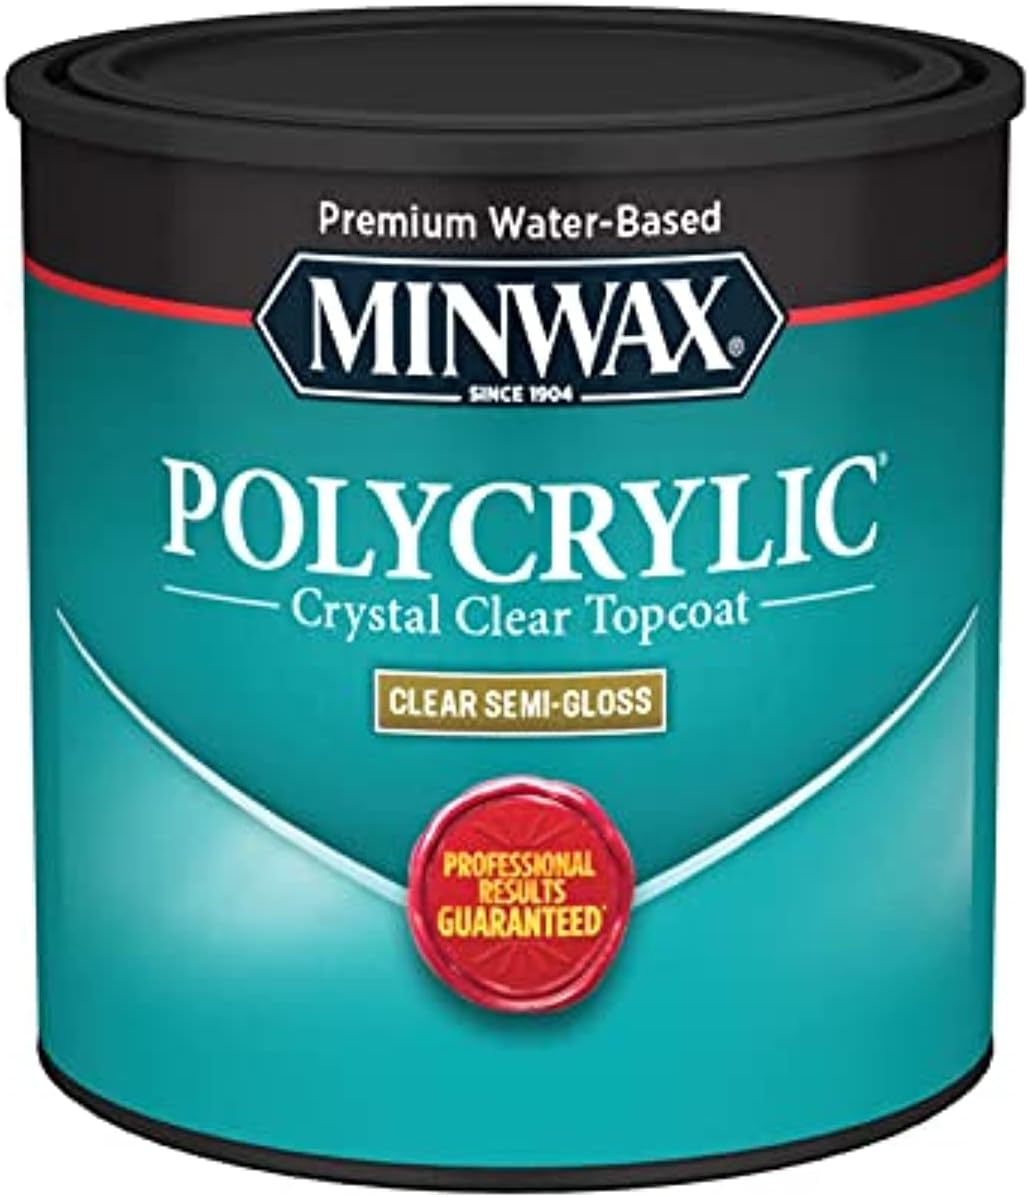 1/2 pt Minwax 24444 Clear Polycrylic Water-Based [...]